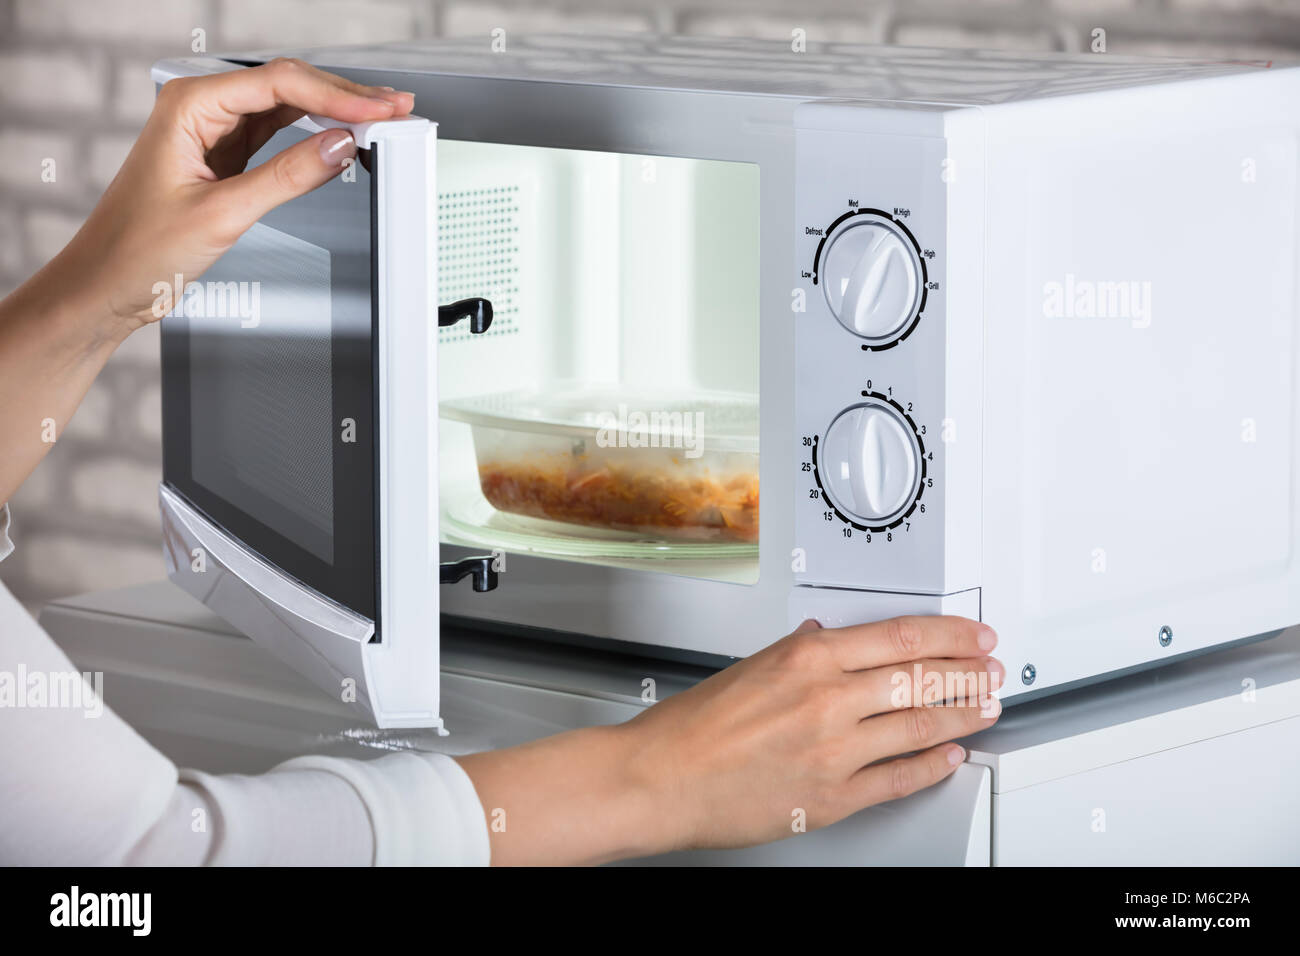 Woman's Hands Closing Microwave Oven Door And Preparing Food At Home Stock Photo